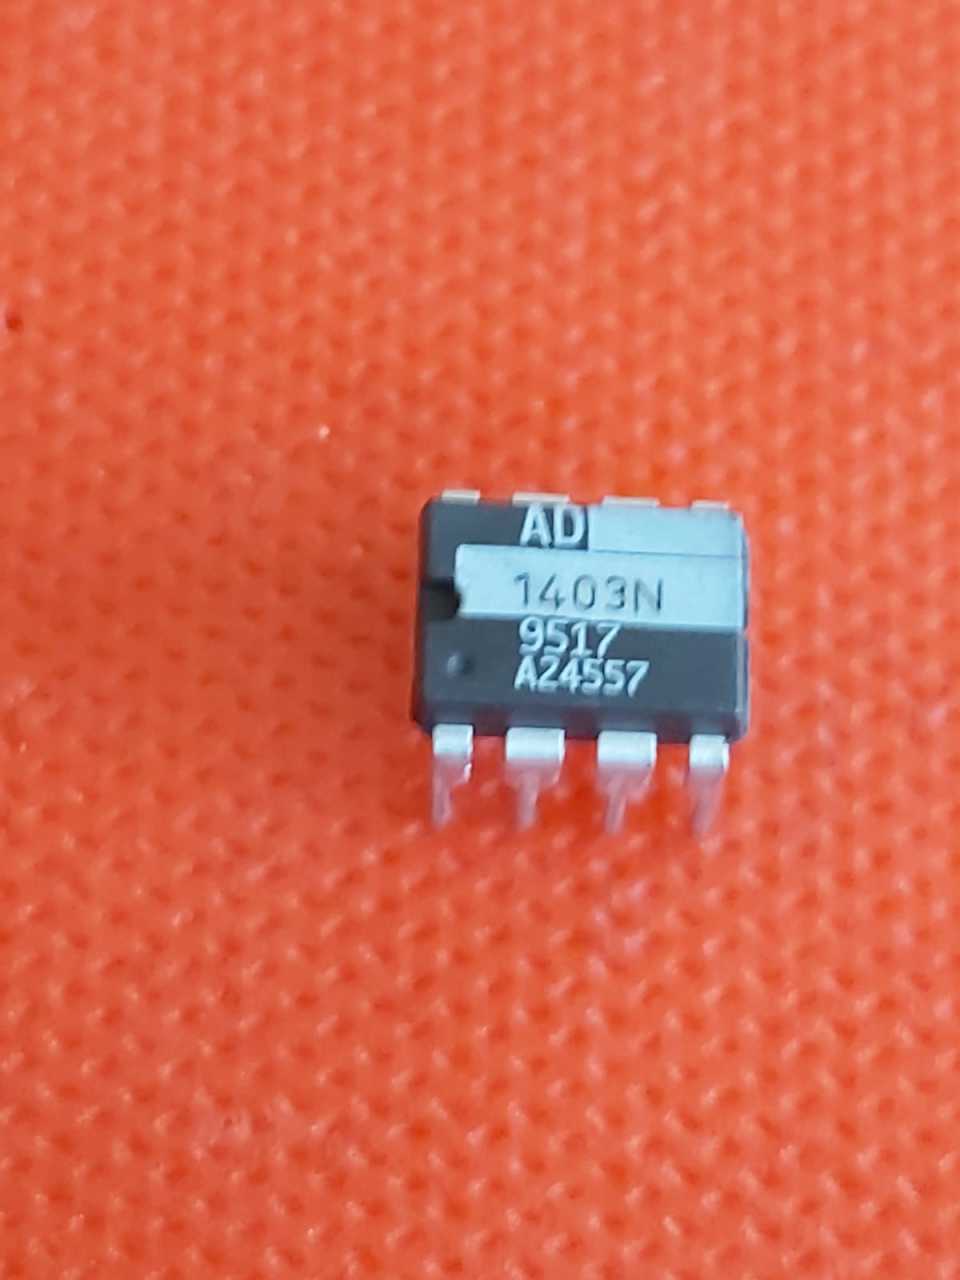 AD1403N Low Cost, Precision 2.5 V IC Reference (sem)